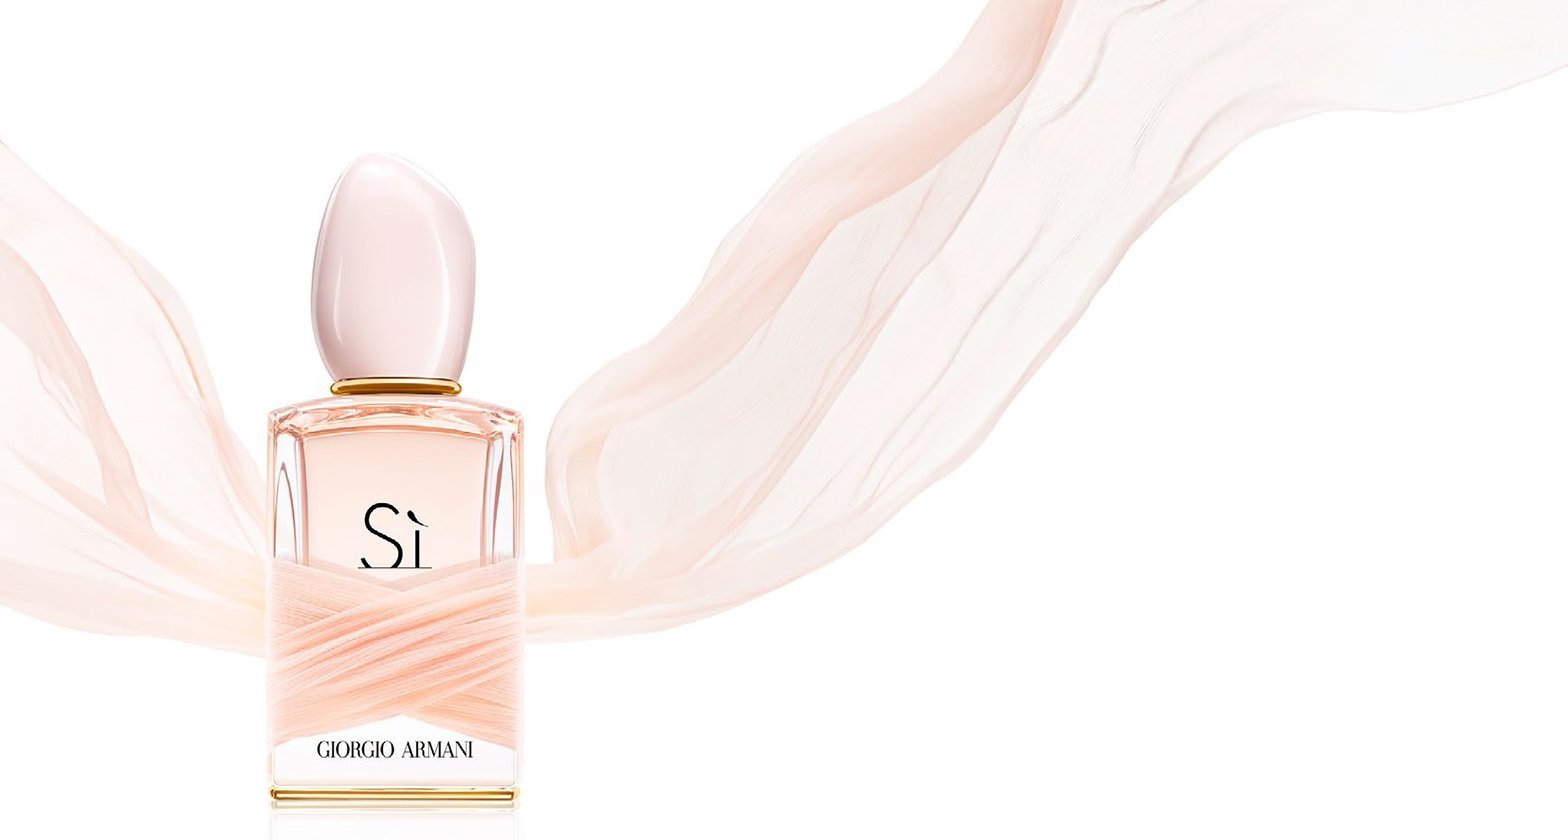 Review of Giorgio Armani Si EDP: The Best Perfume for Women?